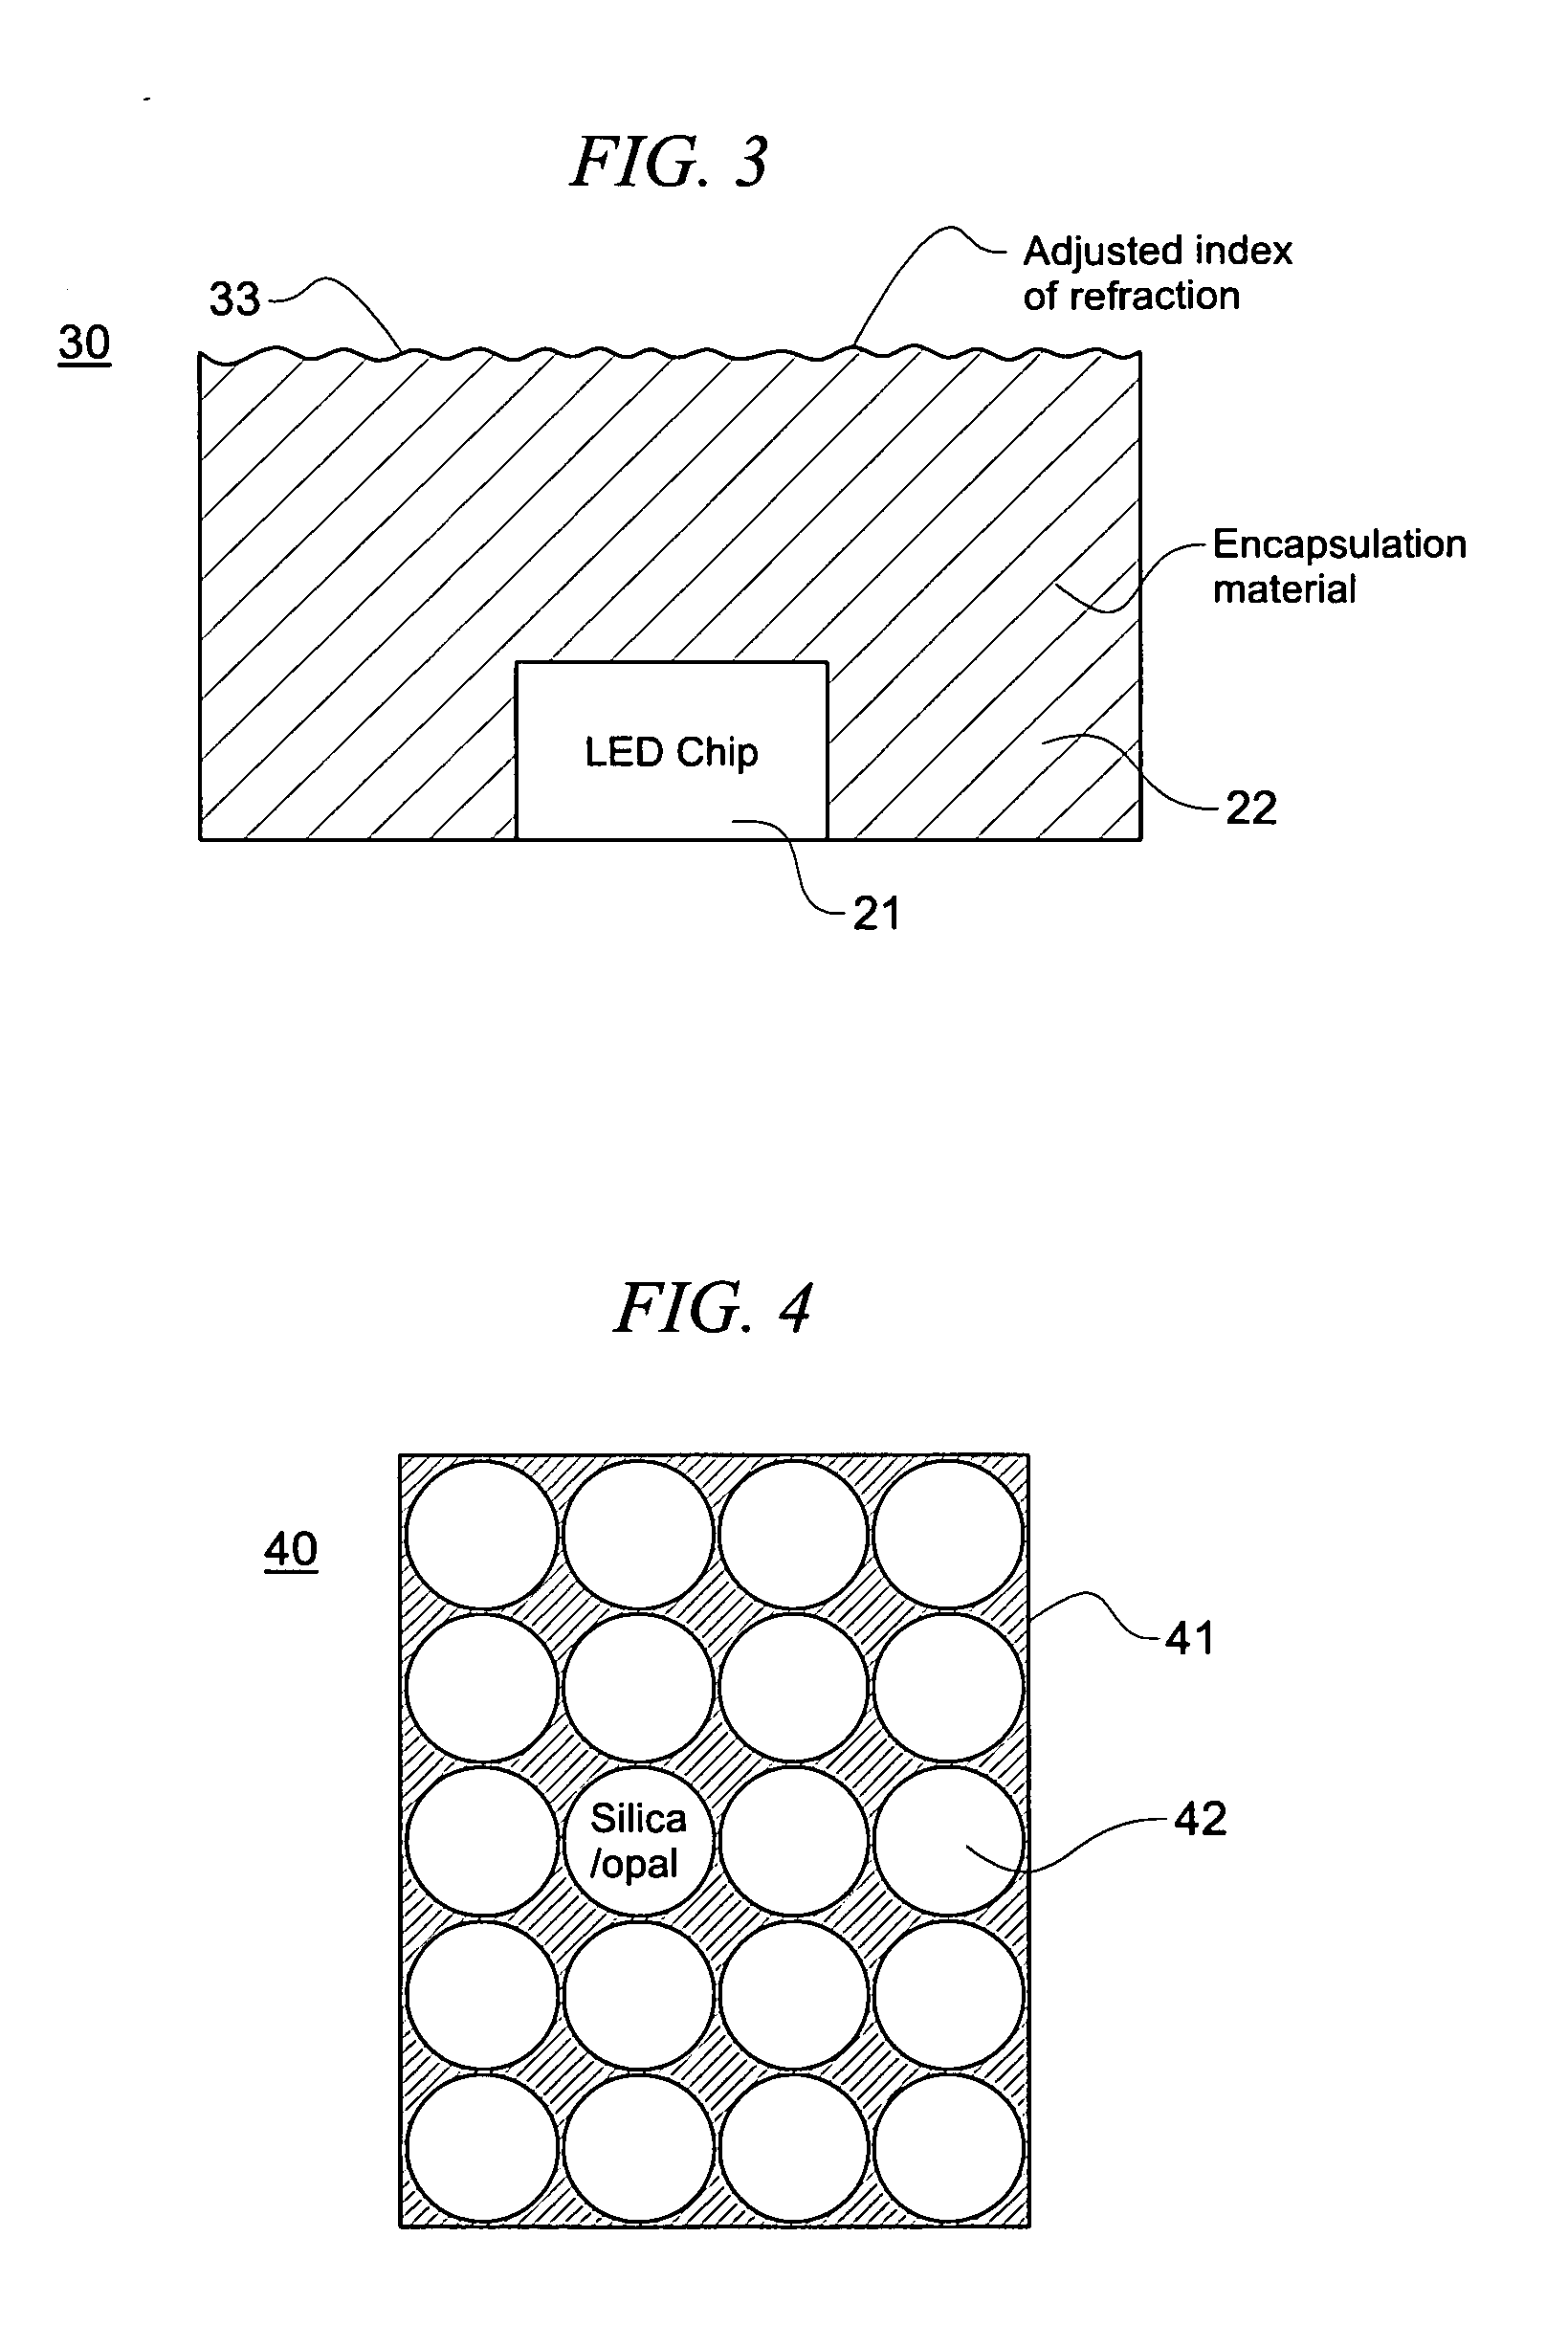 System and method for enhancing light emissions from light packages by adjusting the index of refraction at the surface of the encapsulation material